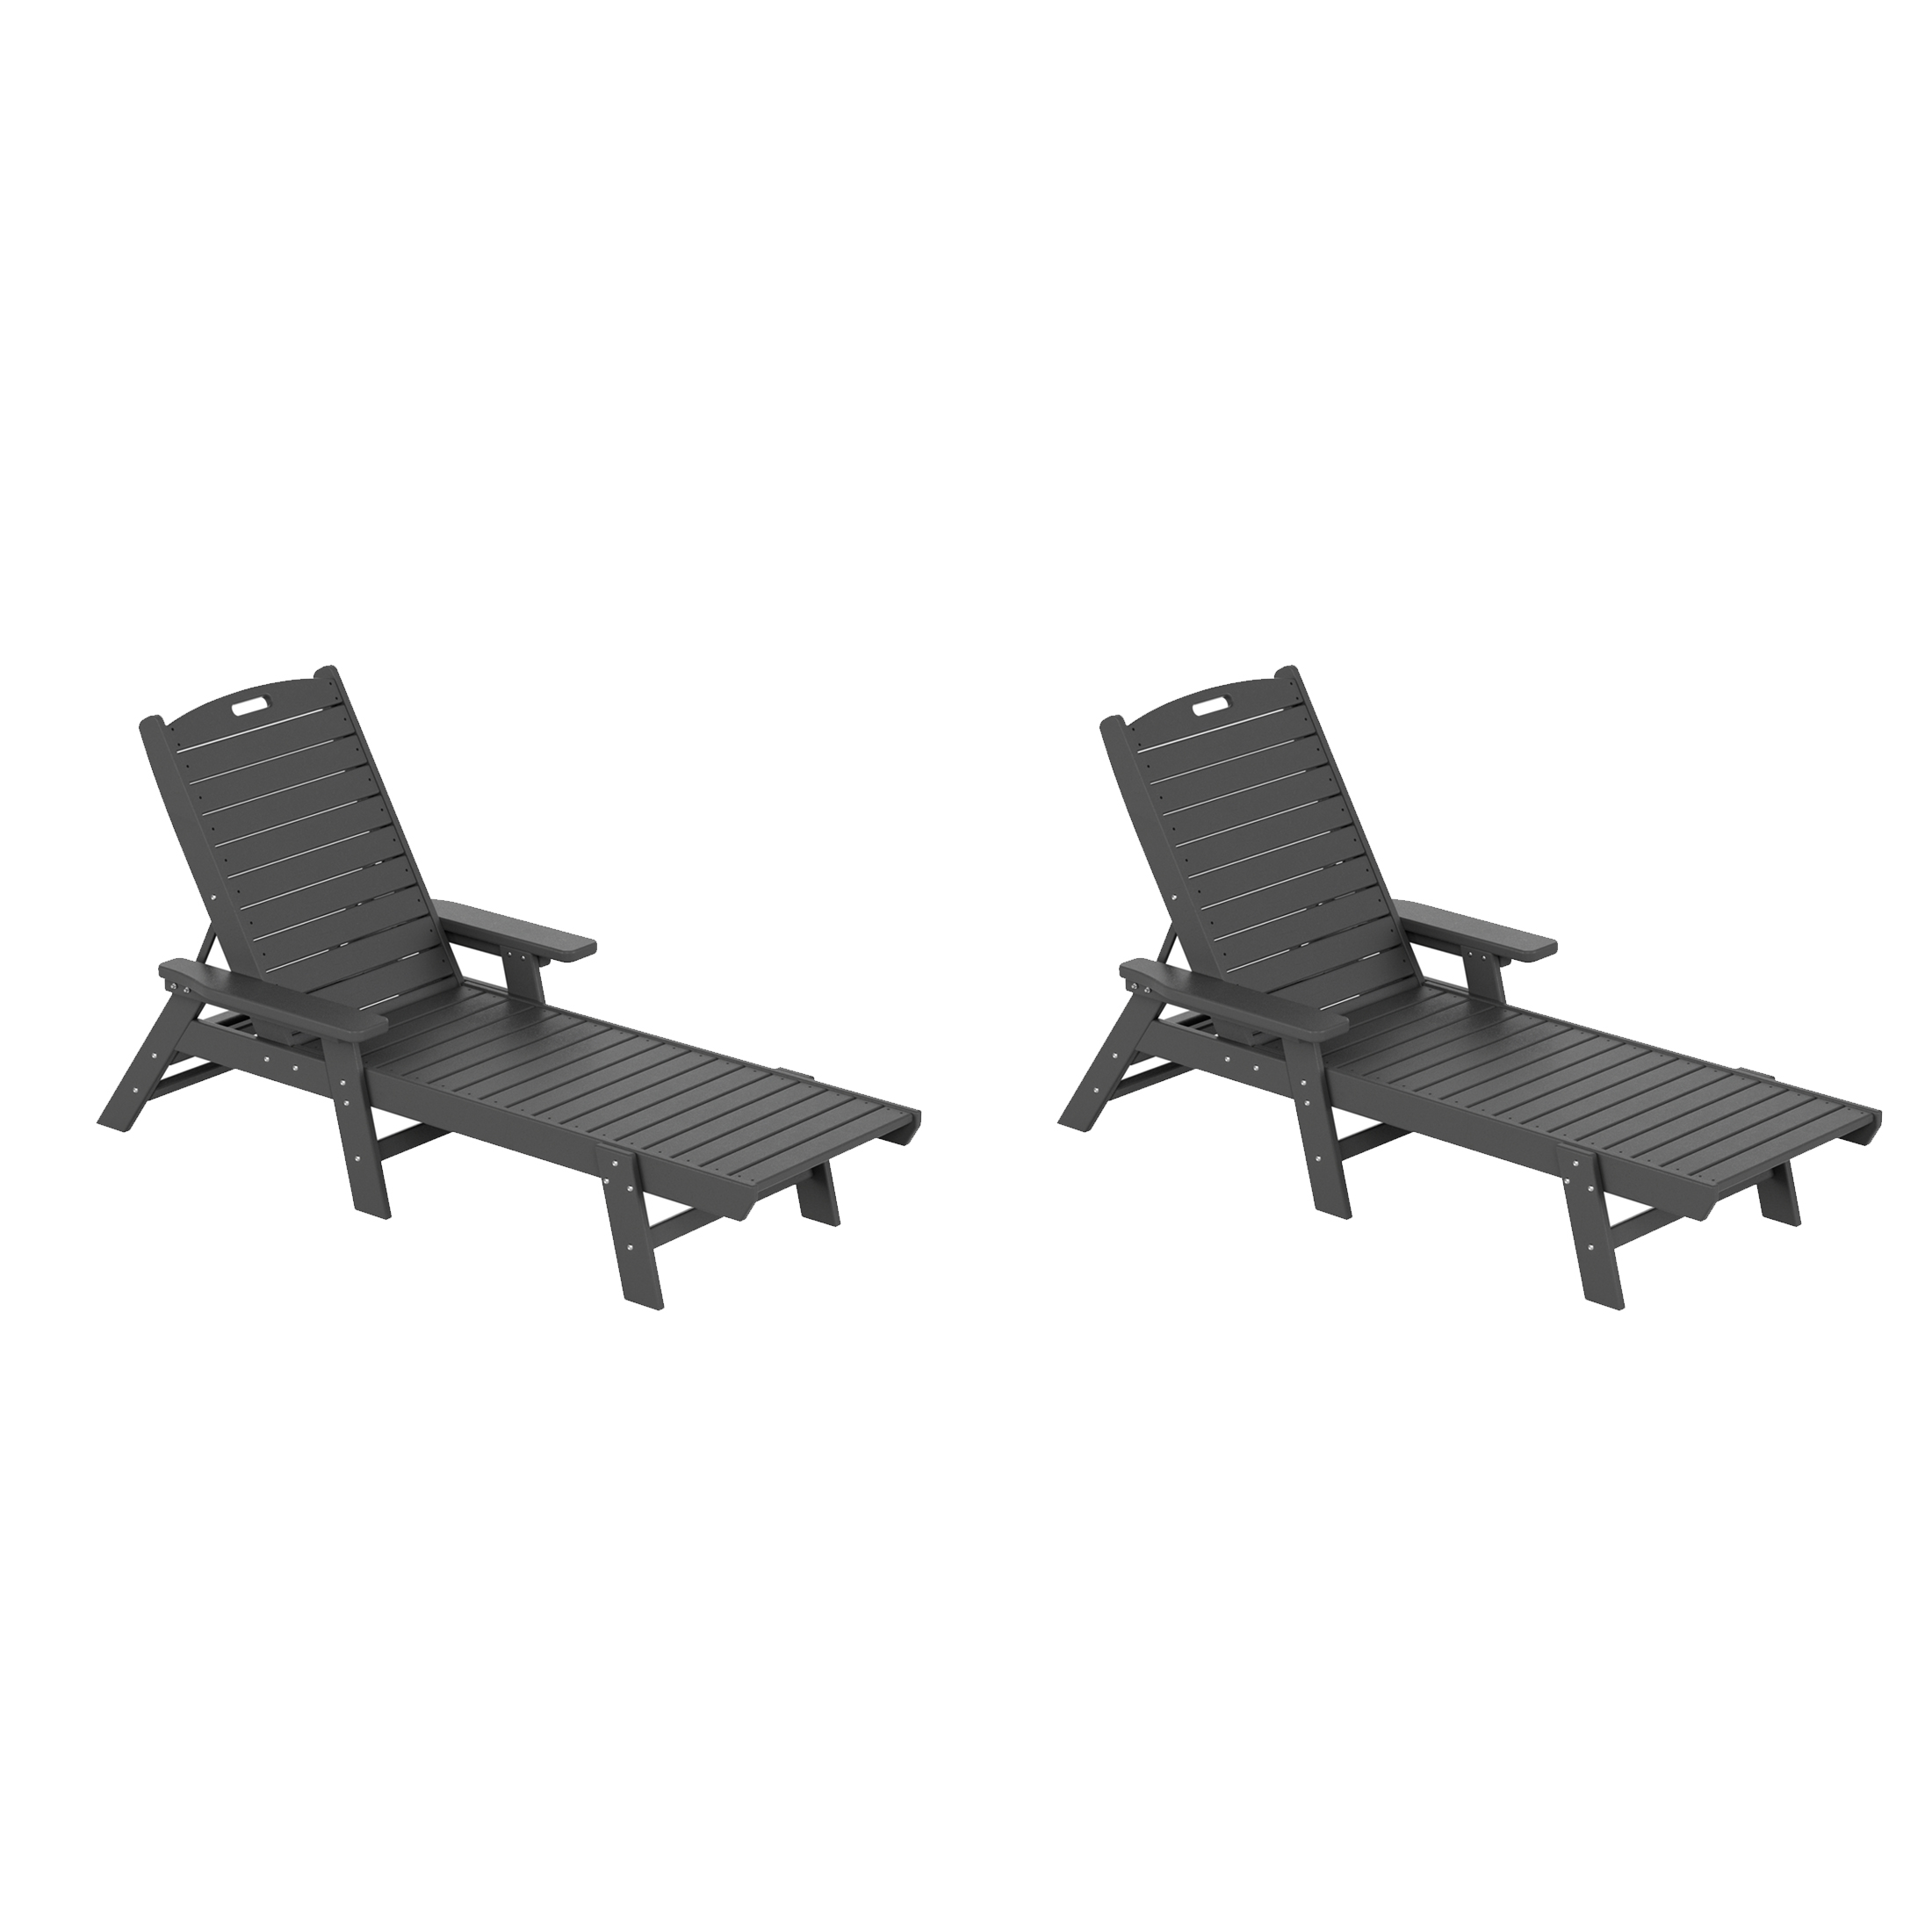 Costaelm Paradise Adirondack Outdoor Chaise Lounge with Arm (Set of 2), Gray - image 1 of 8